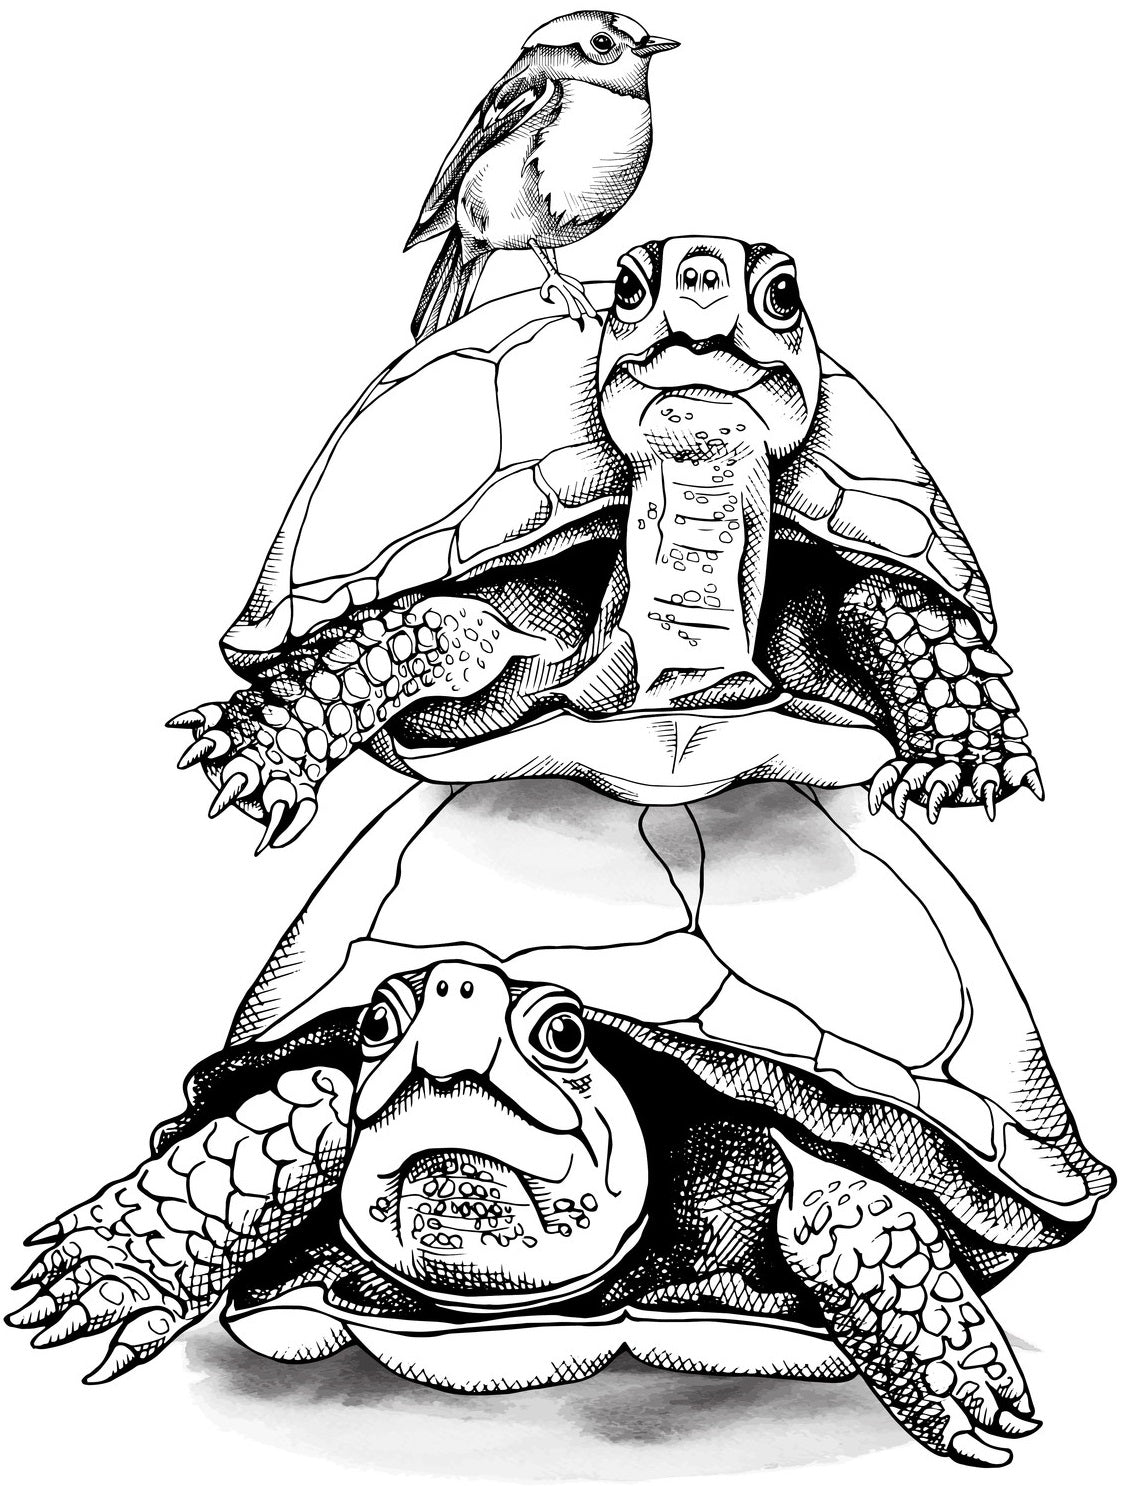 Turtles - Relaxing Coloring (PDF Book) With Tortoises and Sea Turtles